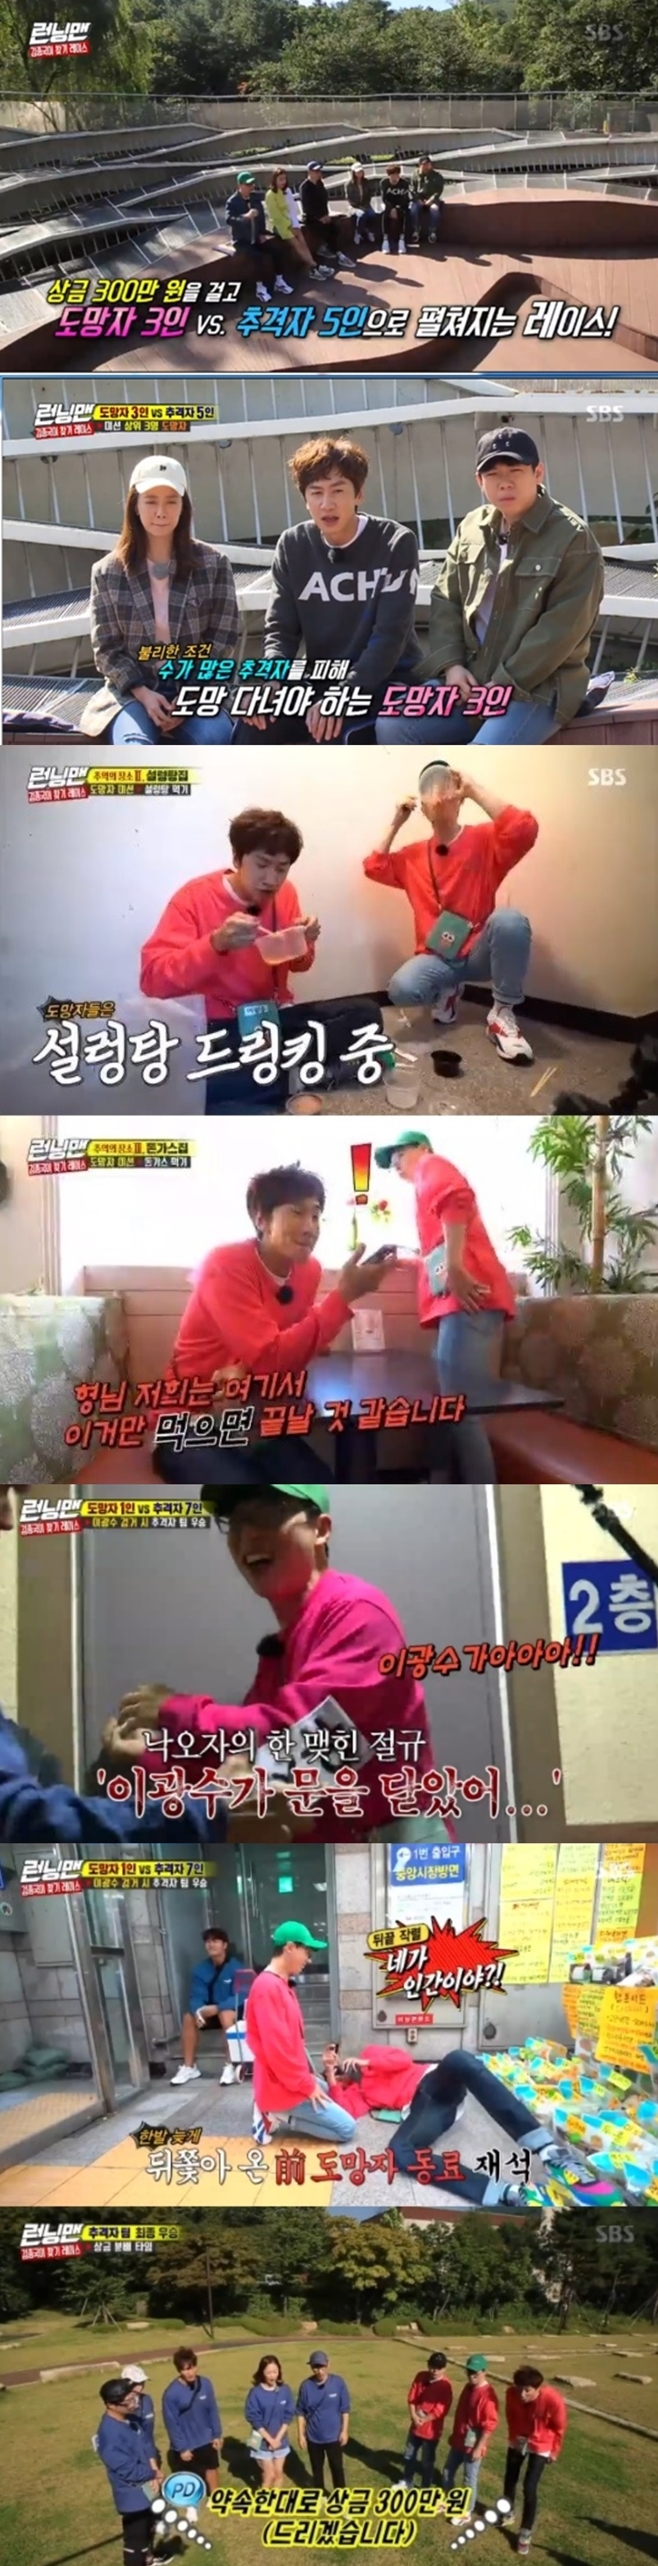 In Running Man, the scene where broadcaster Lee Kwang-soo was caught by Kim Jong-kook with the success of the mission took the best minute.According to Nielsen Korea, a TV viewer rating research institute on the 14th, SBS entertainment program Running Man, which was broadcast on the 13th, recorded 4.0% and 6.4% TV viewer ratings, respectively, in the first and second parts of the metropolitan area.On this day, Kim Jong-kooks home ground Anyang was featured in Kim Jong-kook Finds special feature.Lee Kwang-soo, Yoo Jae-Suk, and Yang Se-chan, who were selected as fugitives, had to escape the Chaser team and succeed in missioning at three places where Kim Jong-kooks memories were filled, and the pursuit team was able to win a prize money of 3 million won if Kim Jong-kook was arrested.First, the fugitive team discovered that Kim Jong-kook recently held a signing ceremony at a shopping mall in Anyang, and moved to the place and succeeded in commissioning 110 signs in the shopping mall like Kim Jong-kook.However, Yang Se-chan was caught in the second mission site, Kim Jong-kook regular Seollungtang house.Yoo Jae-Suk and Lee Kwang-soo then managed to escape while The Chaser team was focused on Yang Se-chan, and chose the Don gas house on Anyang 1st Street as the last mission site.After that, Ji Suk-jin led Kim Jong-kooks alma mater Shinseong High School to avoid the chase team, but Haha, who was quick to notice, headed to Anyang 1st Street at Lee Kwang-soo, I think it will end if I eat this here.Yoo Jae-Suk and Lee Kwang-soo, who eventually met the pursuit team at the Dongas house, fled to the back gate, while Lee Kwang-soo betrayed Yoo Jae-Suk and fled back to the front gate.With Yoo Jae-Suk also arrested, Lee Kwang-soo fled to Anyang underground shopping mall, but was caught by Kim Jong-kook just before the mission success.The scene claimed best one minute with top TV viewer ratings of 7.5 per minute.Kim Jong-kook shared a prize money of 1 million won alongside Haha and Song Ji-hyo, who have never betrayed.